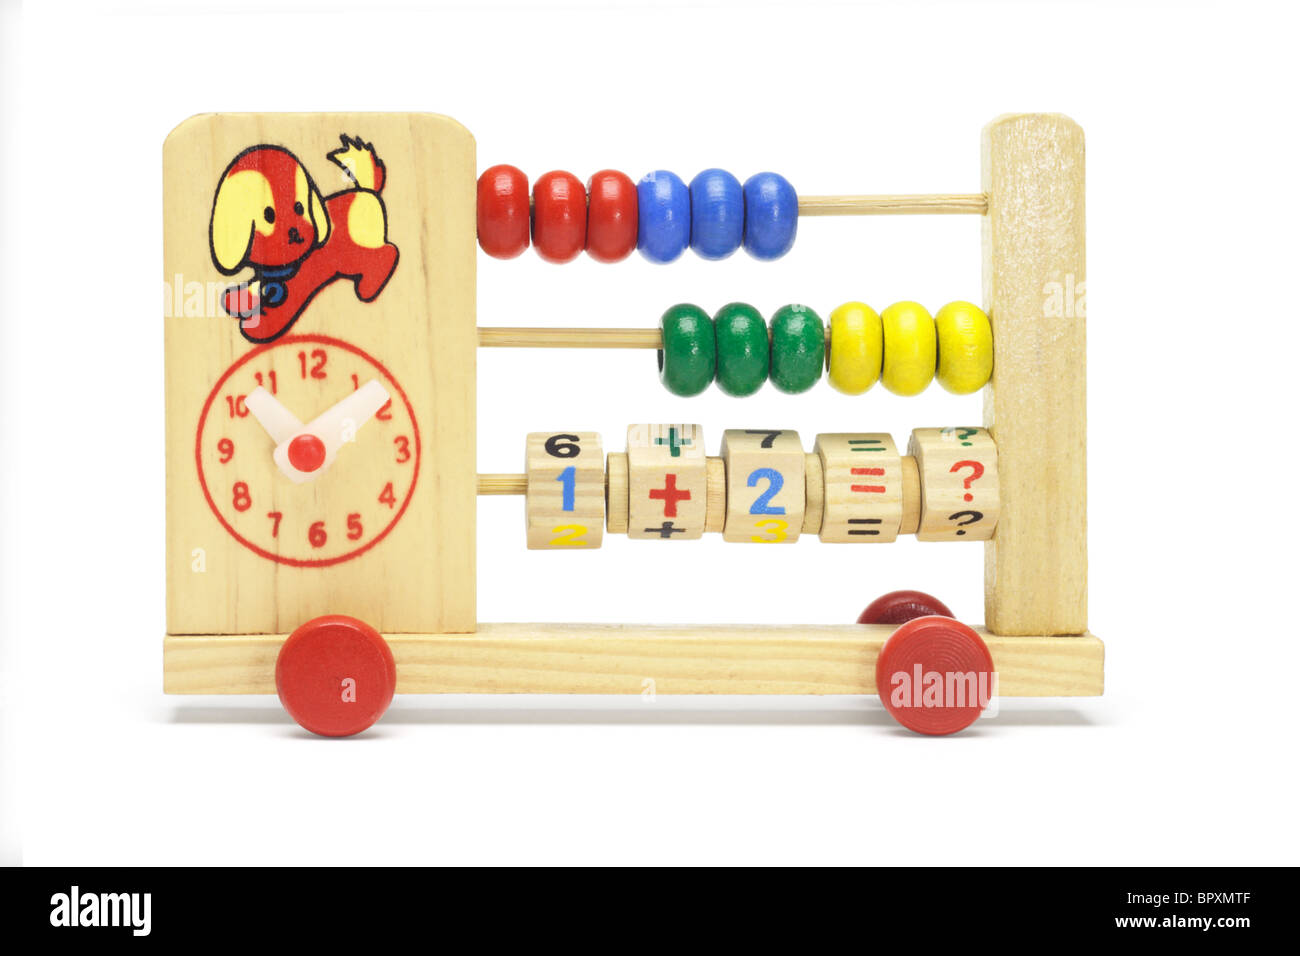 Child learning toy abacus and clock on wheels Stock Photo